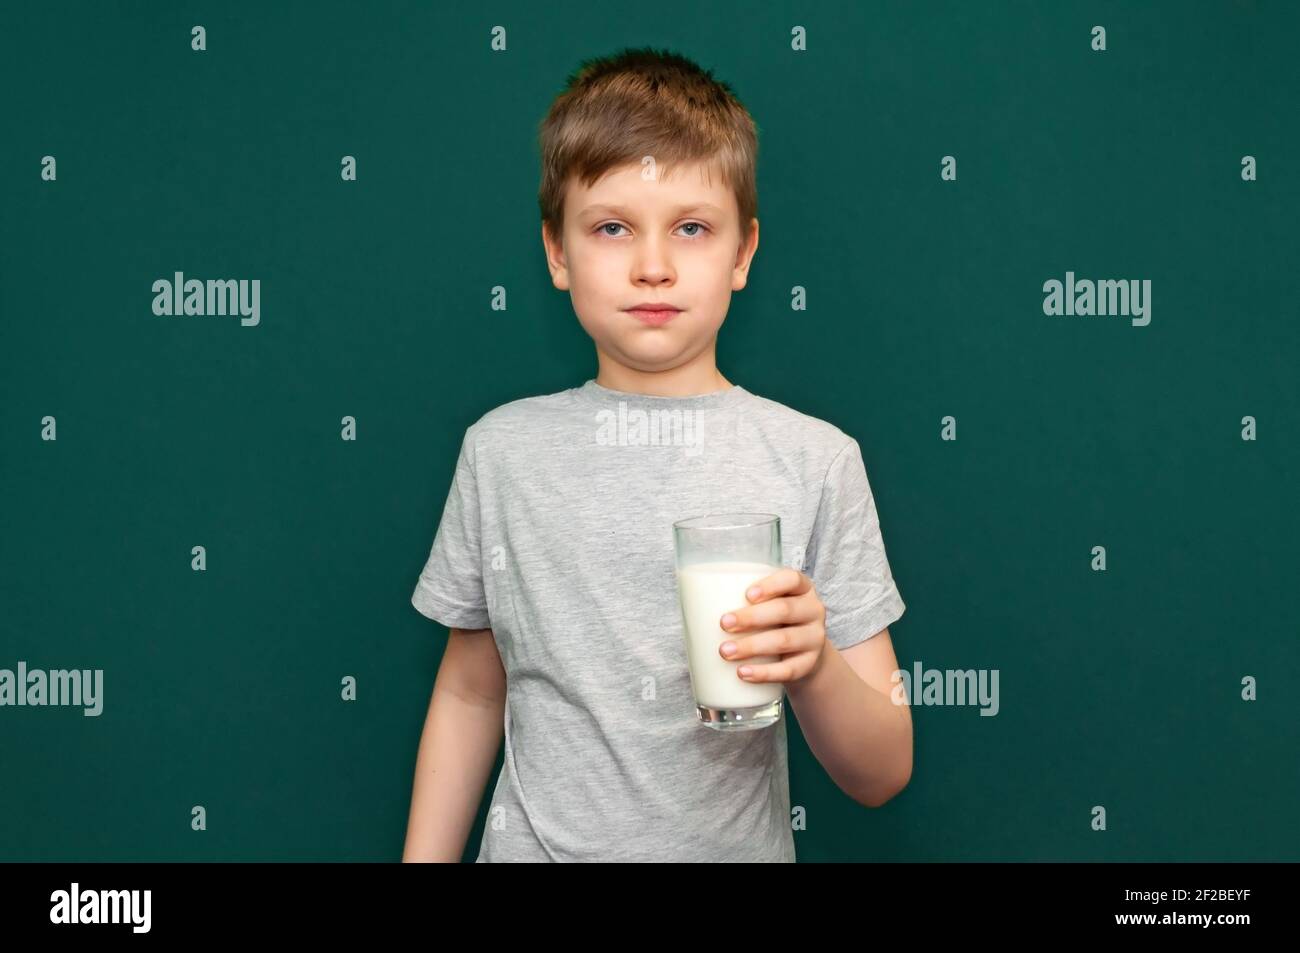 Boy child holding a glass of milk in her hands Stock Photo